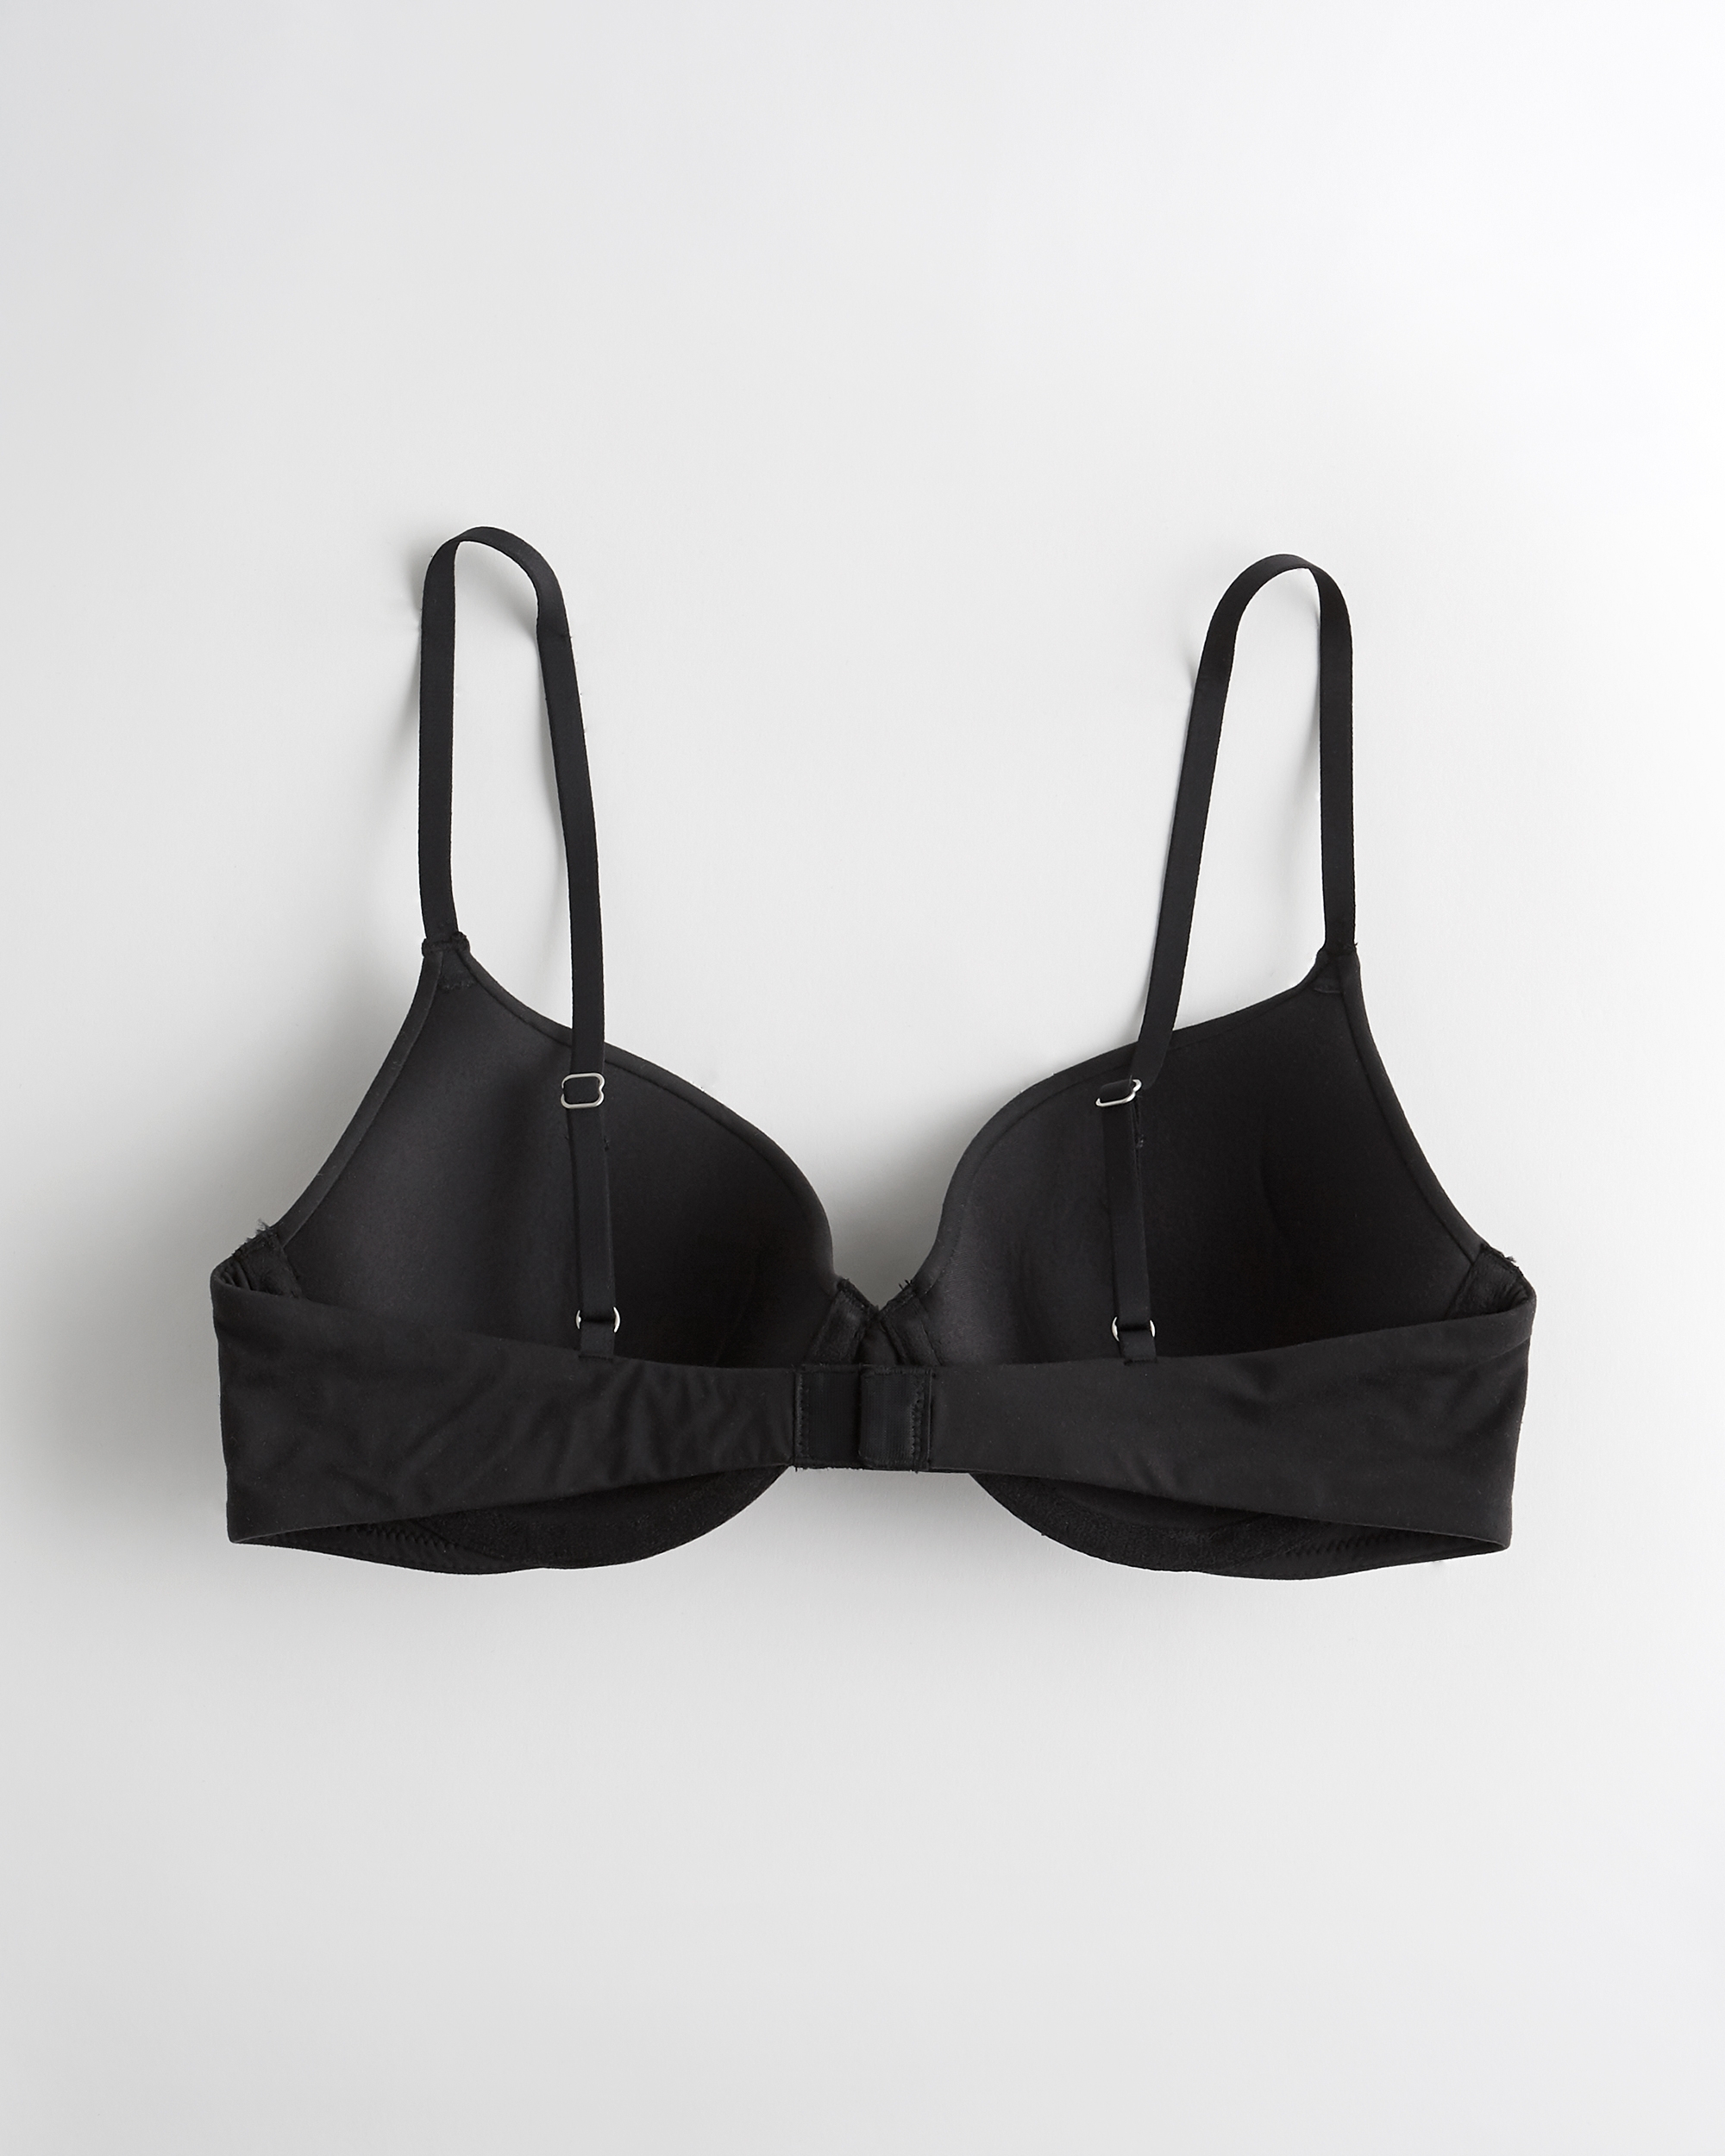 Gilly Hicks Intimates & Sleepwear Hollister Black Lace Bralette - $4 - From  Michel